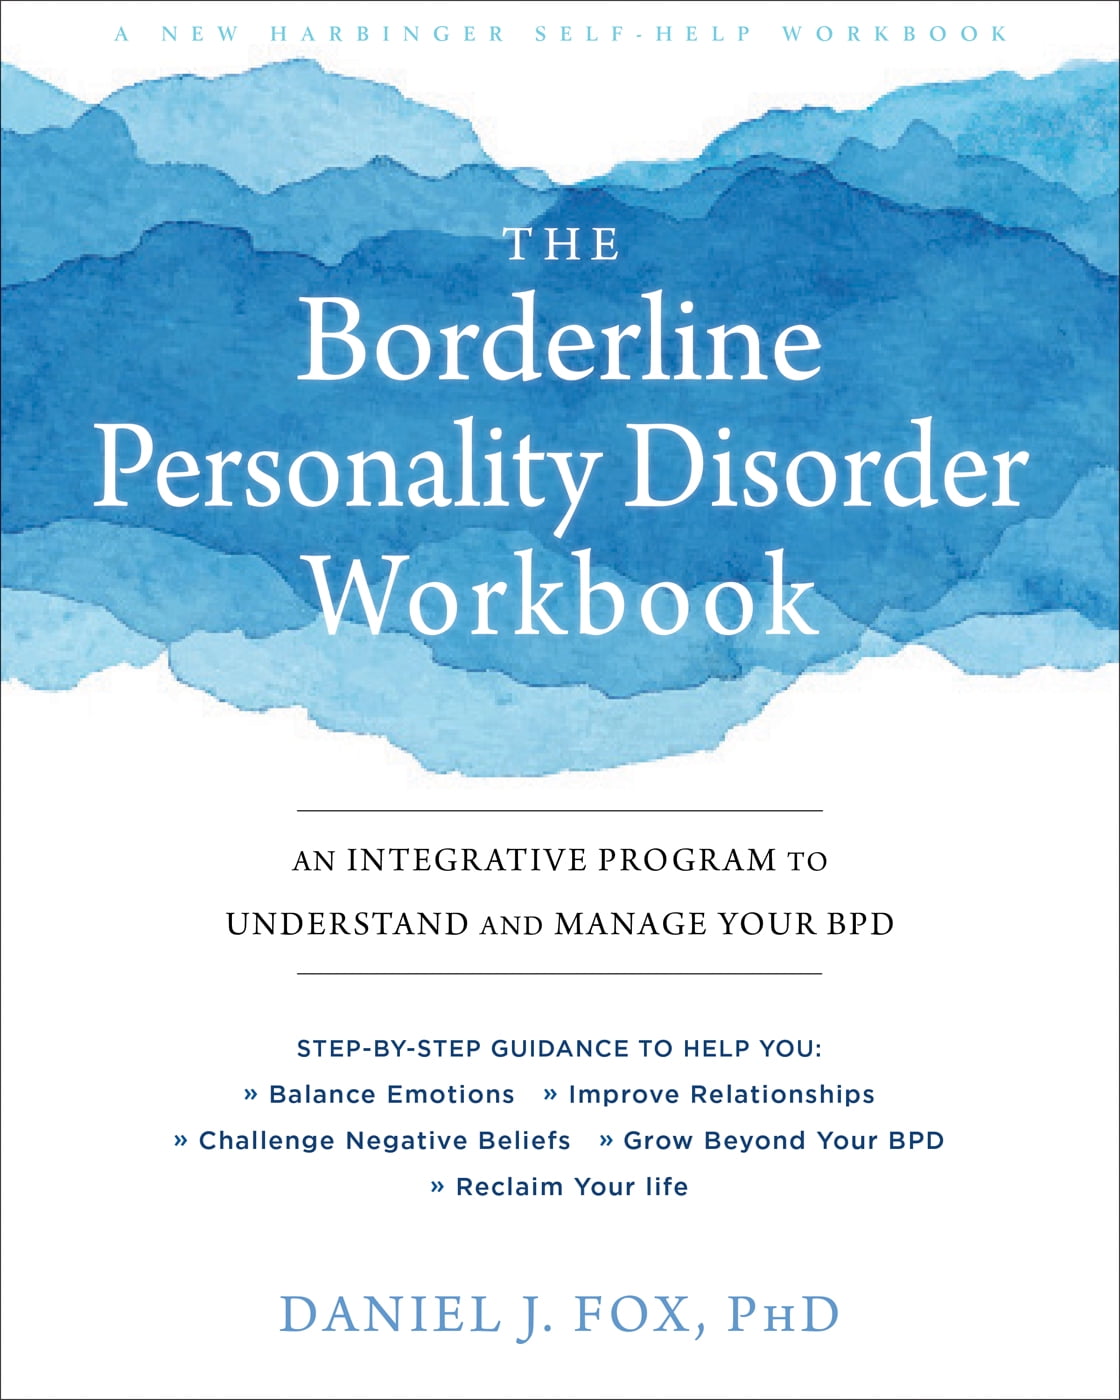 New Research Explores The Nuances Of Borderline Personality Disorder